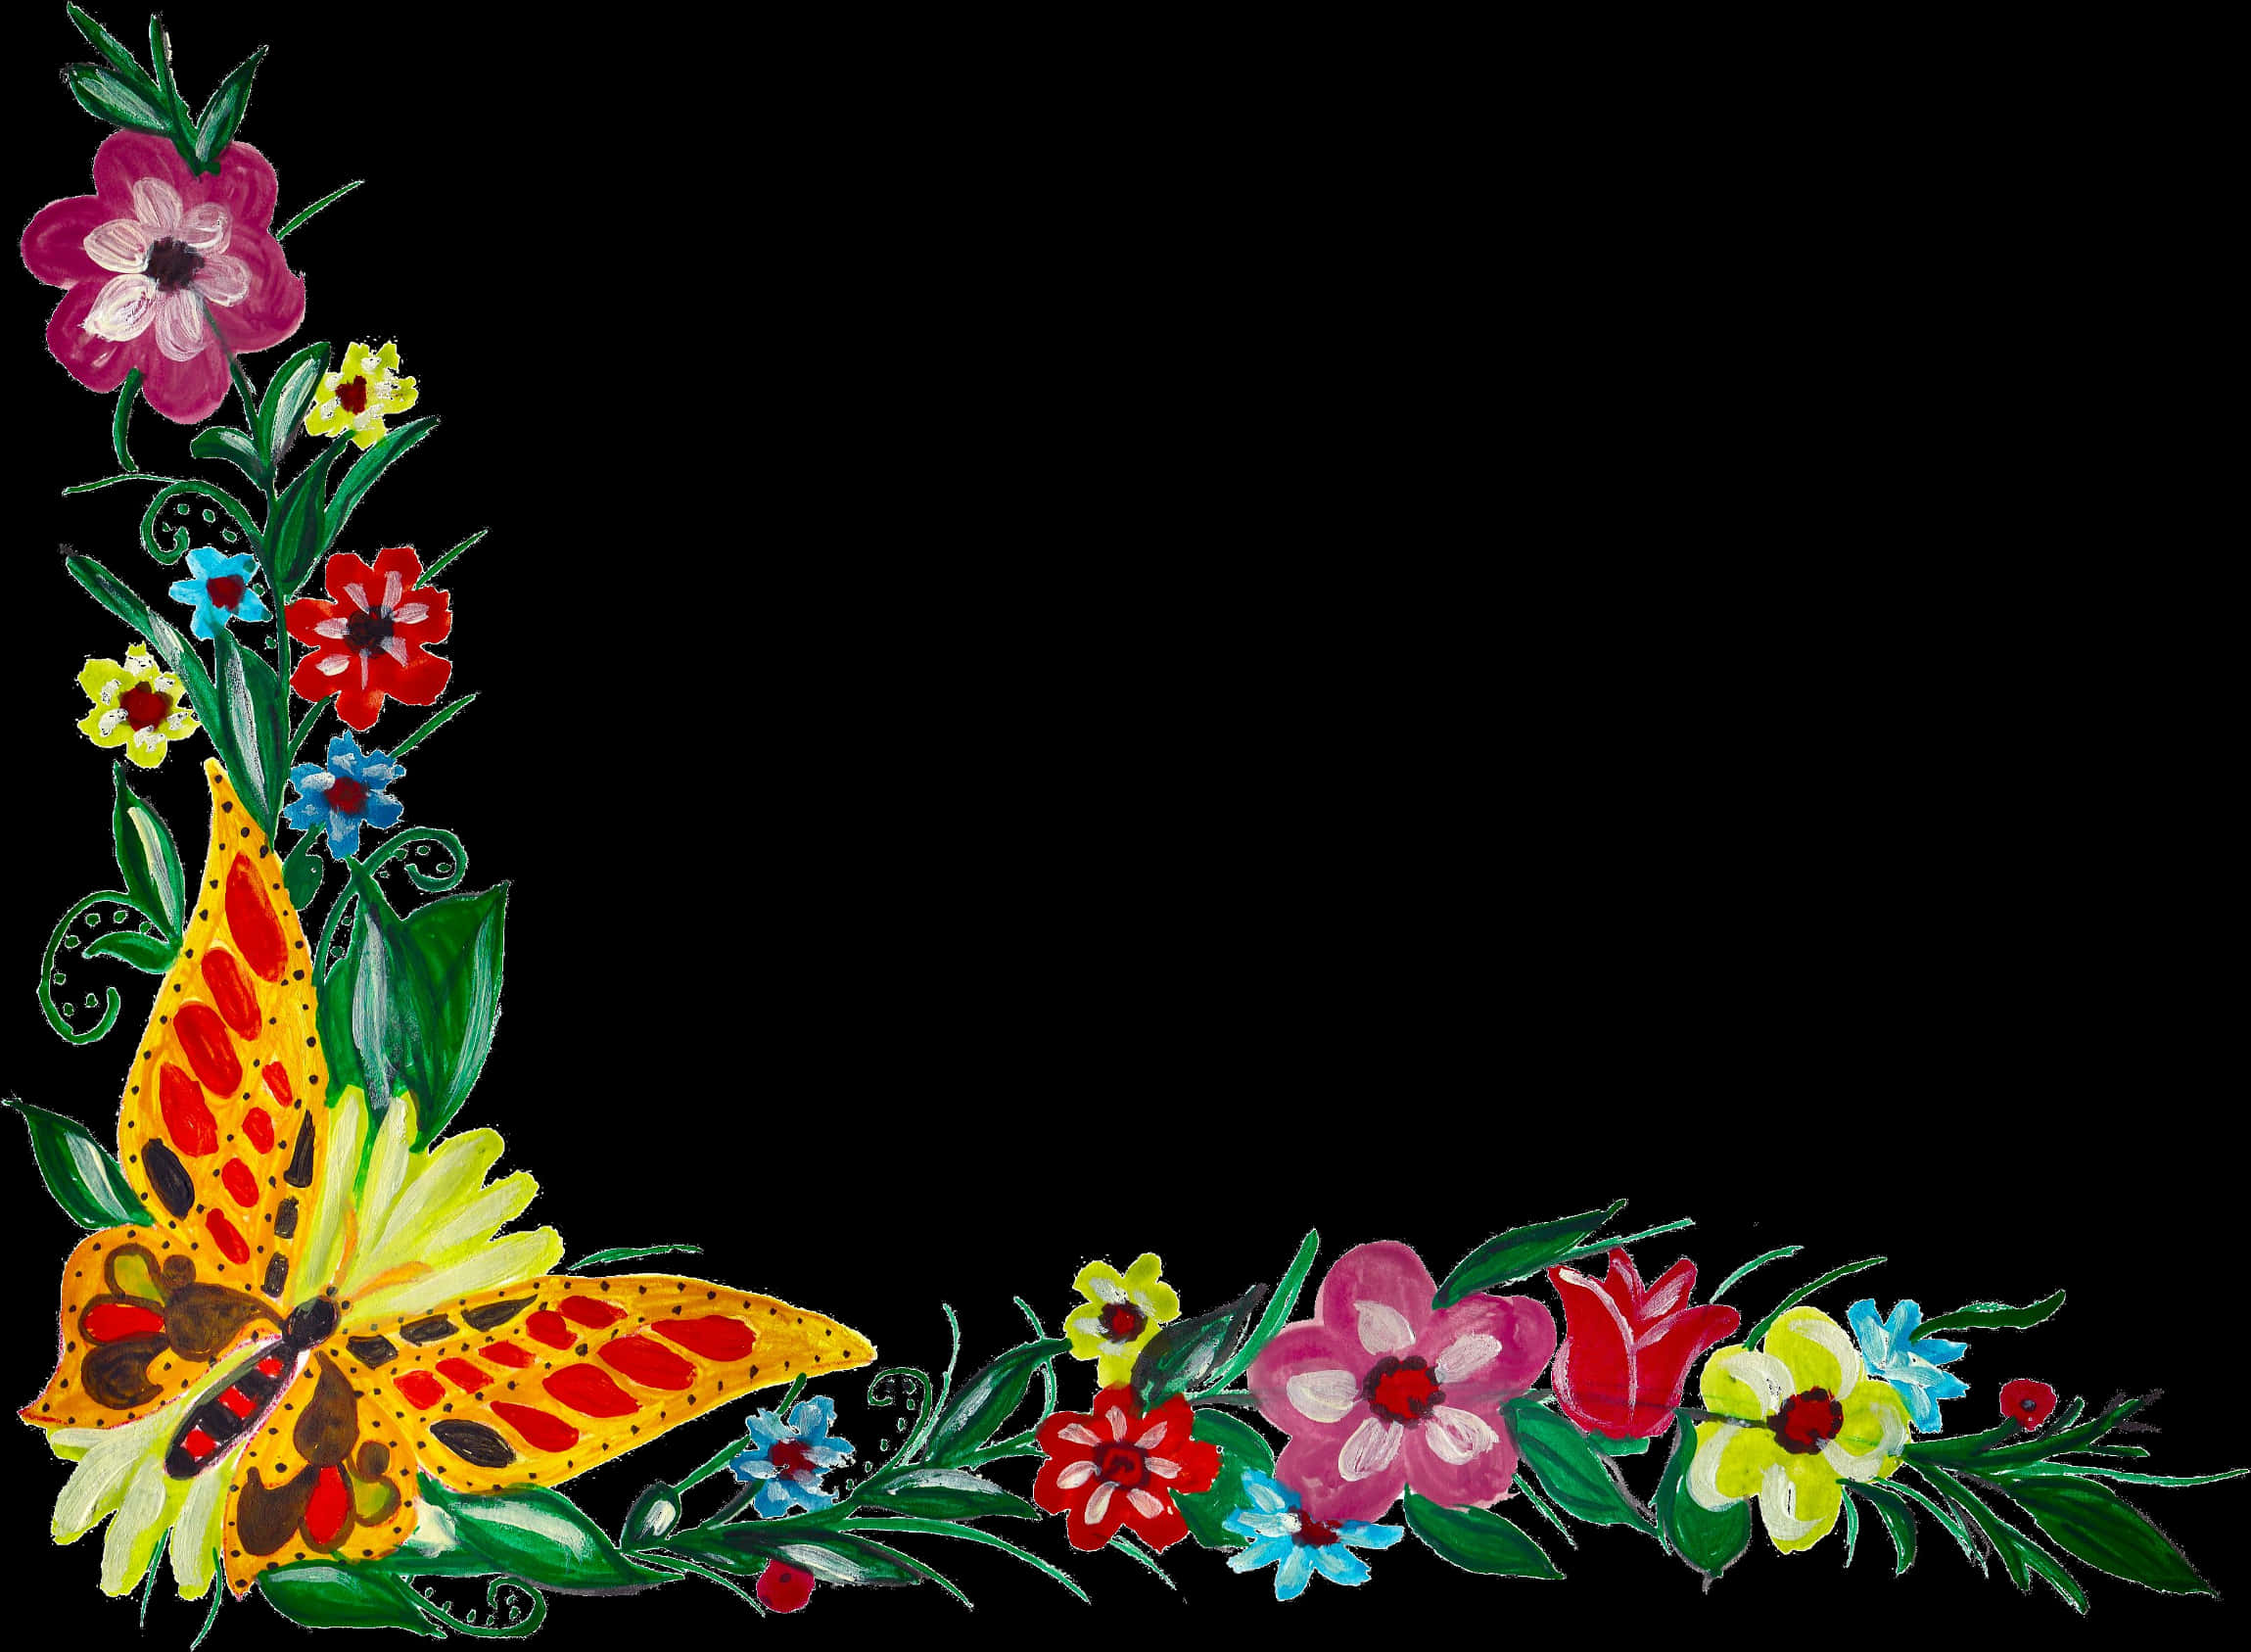 Colorful Floral Borderwith Butterfly PNG